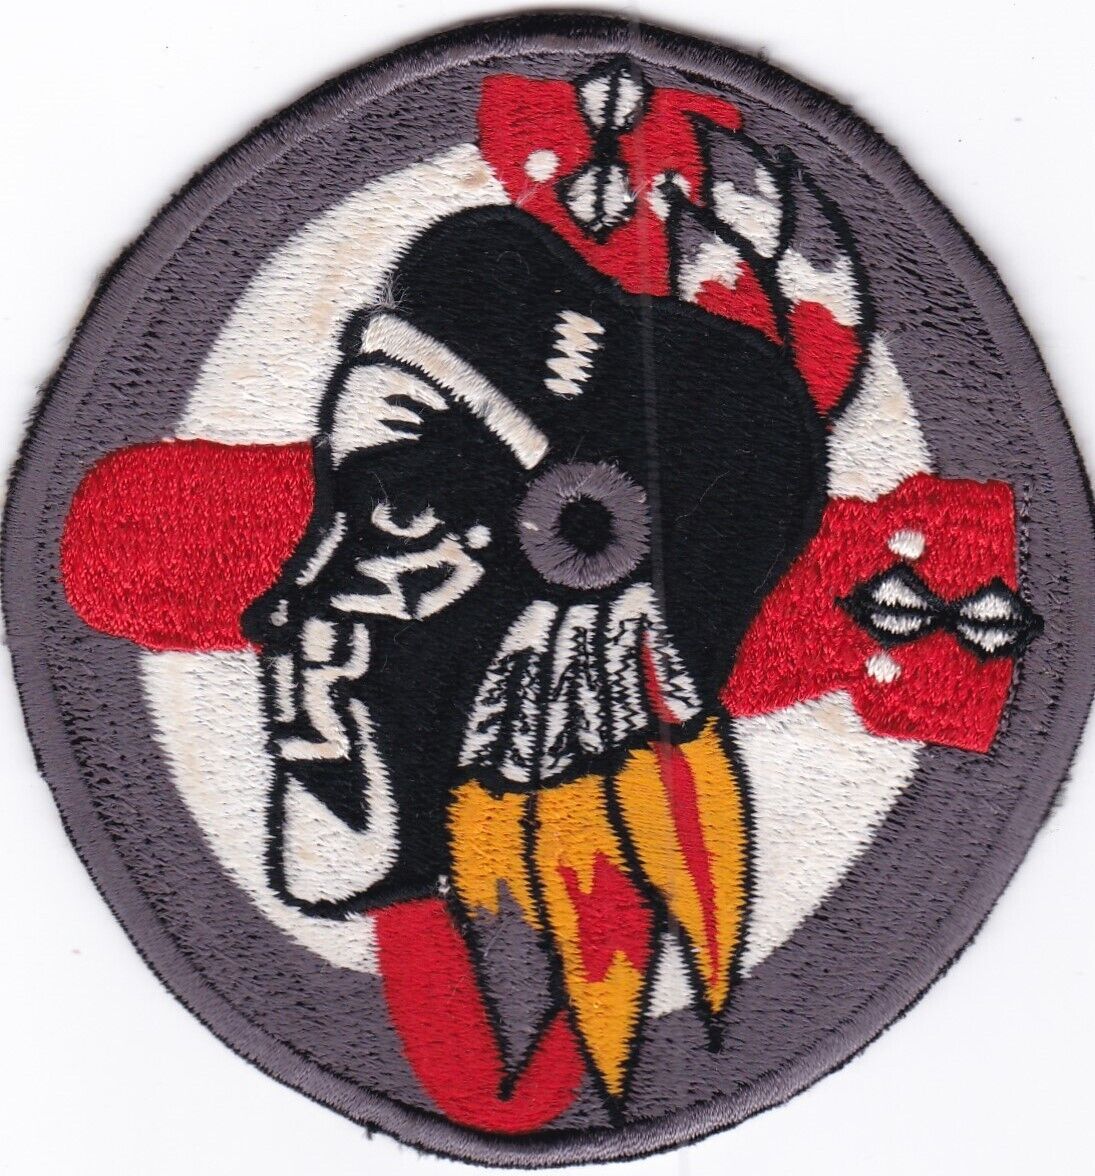 WWII USAAF 507th Bomb Squadron 504th-333rd Bomb Group 20th Air Force Patch Q-9